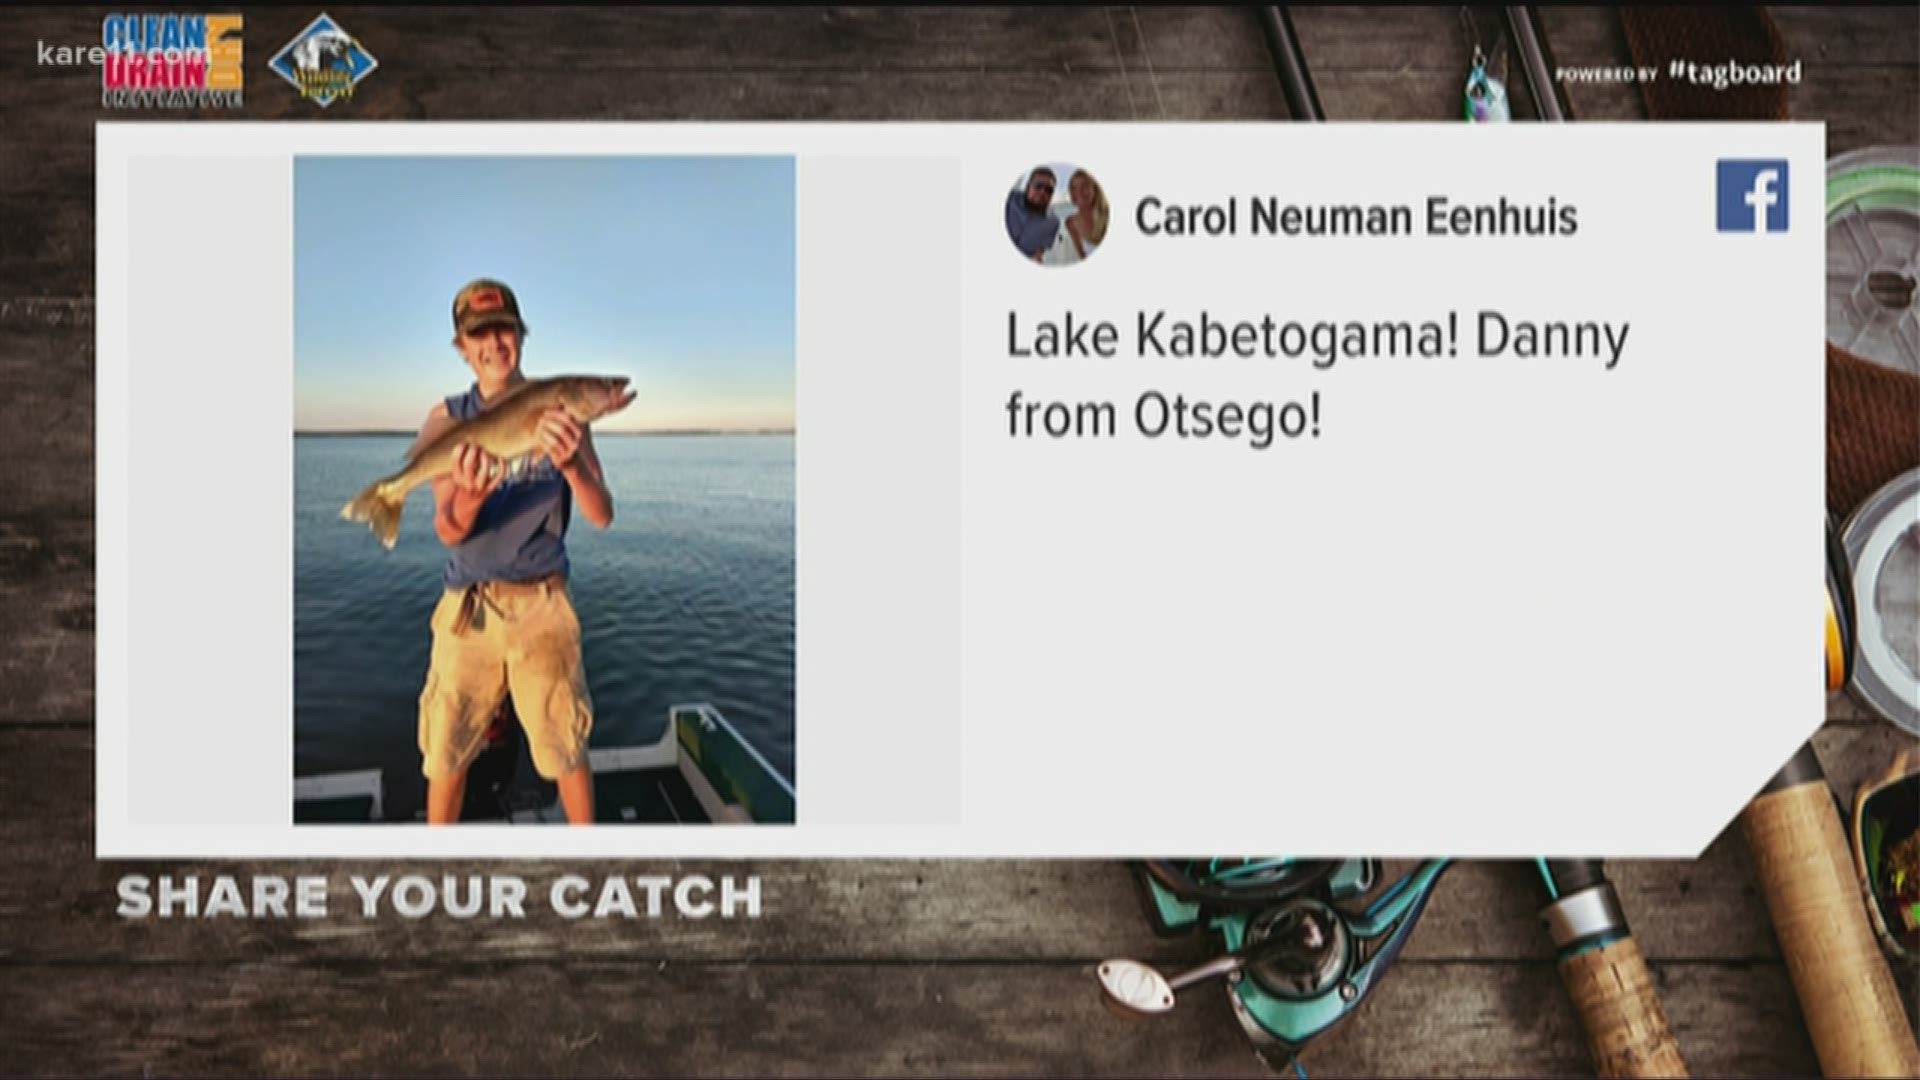 Share your photos with us on Twitter and Instagram using #KAREShareYourCatch or post them on our Facebook page. We'll share some on KARE 11 News on Saturday at 6 p.m. https://kare11.tv/2L9GvAV